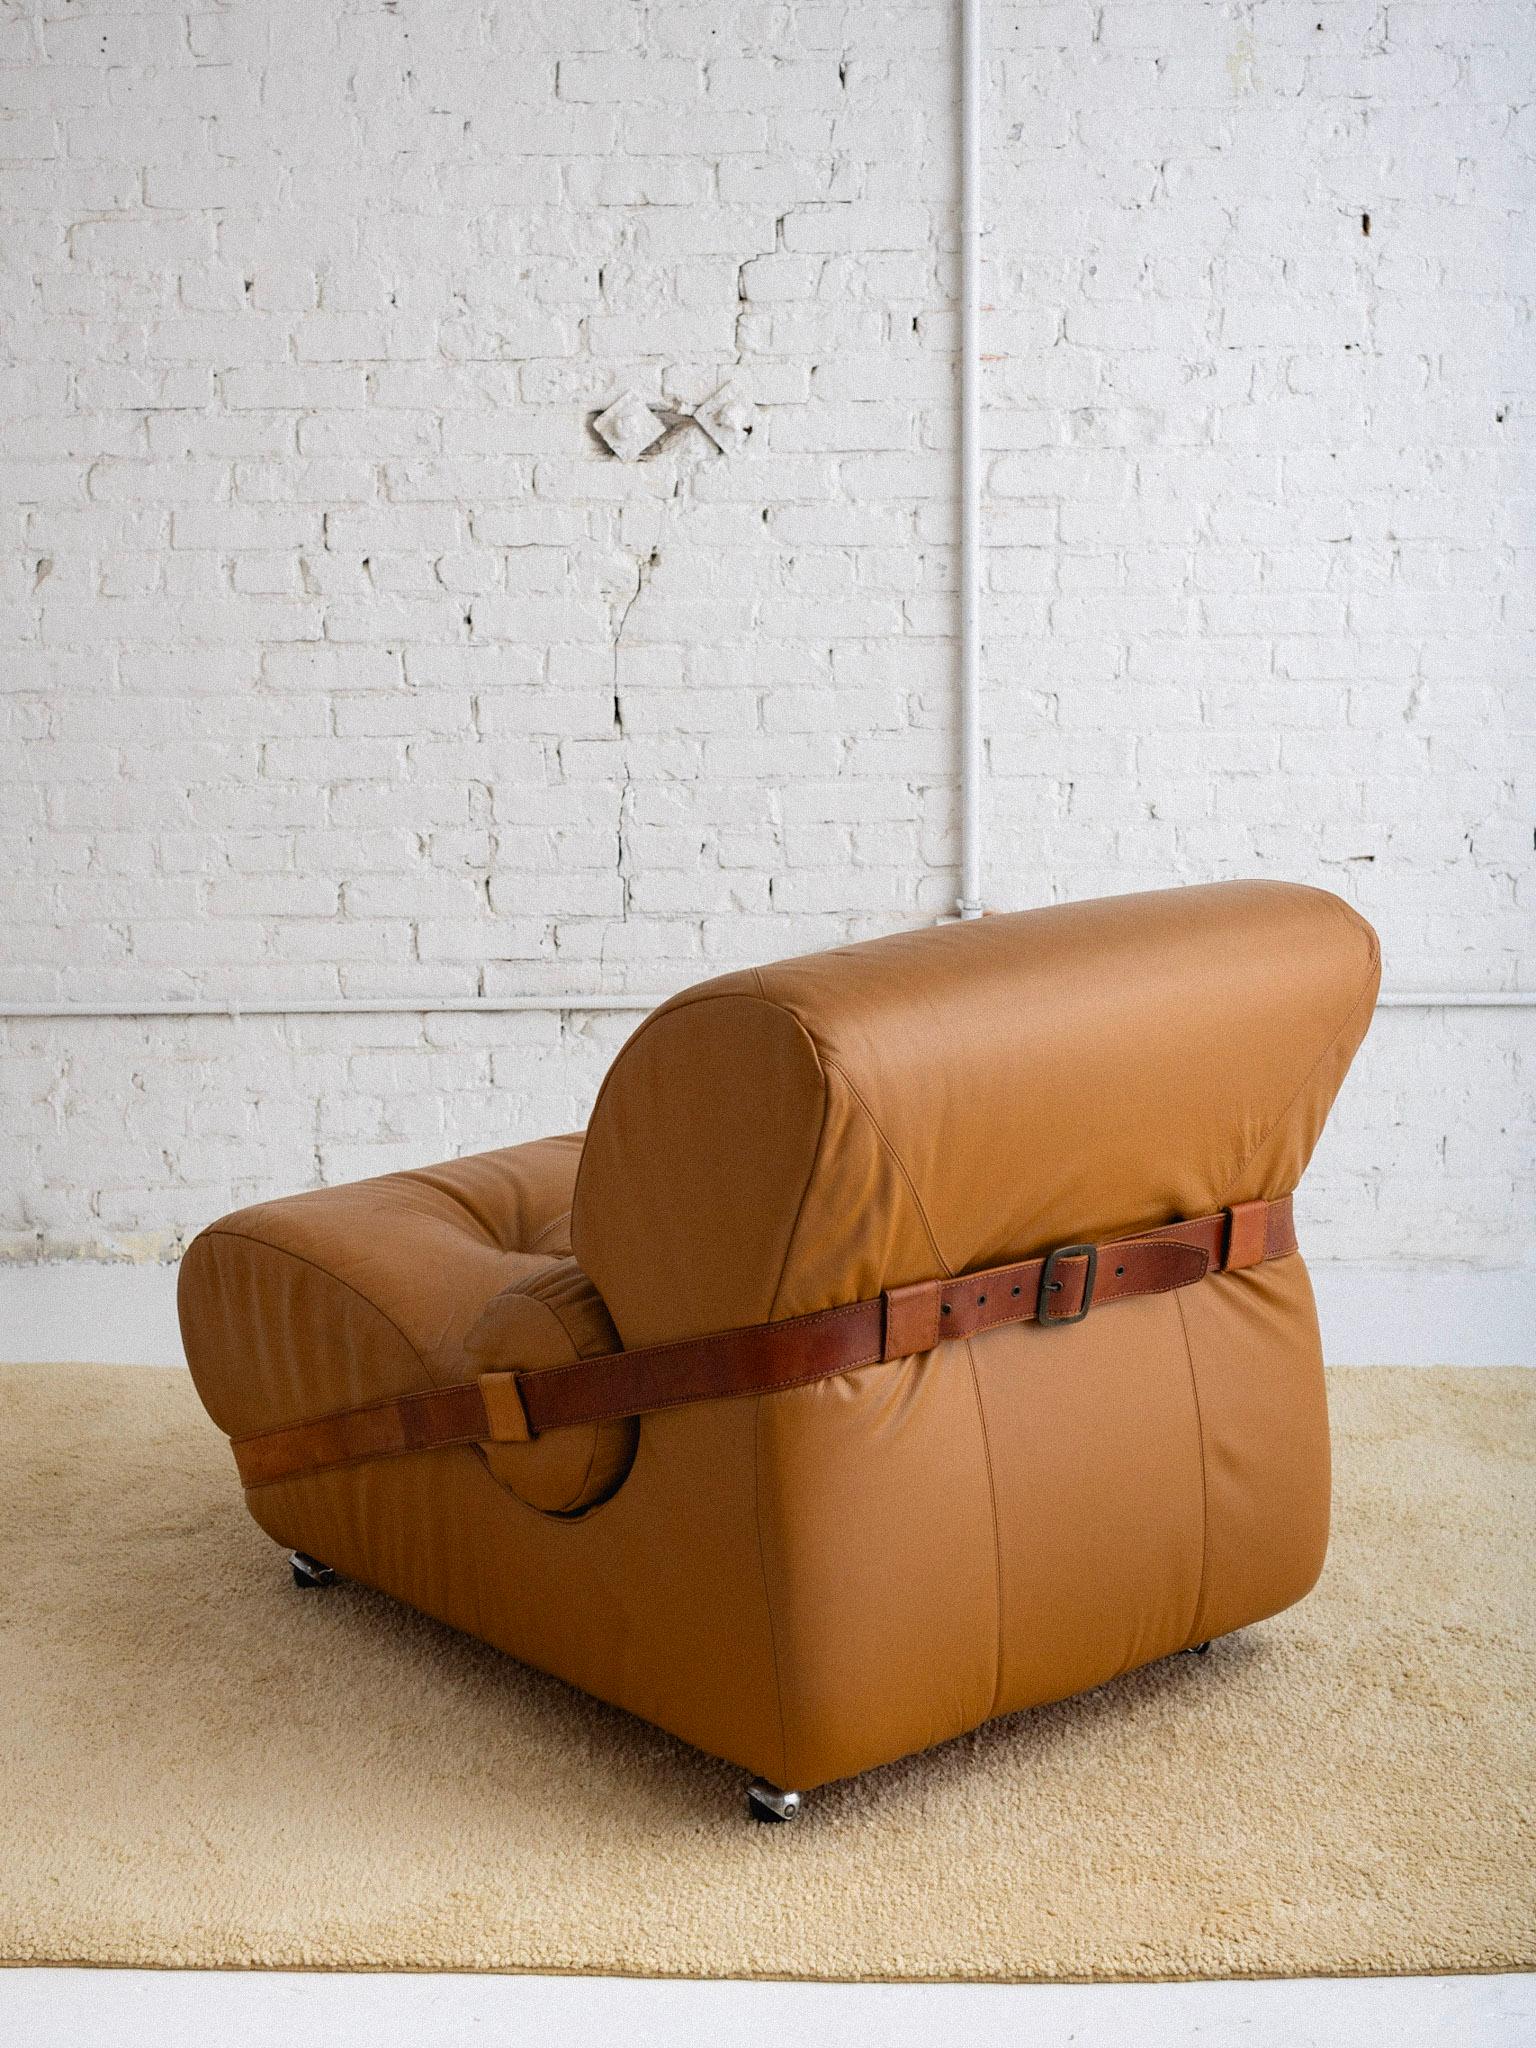 Overstuffed Italian Leather Lounge Chair & Ottoman For Sale 2